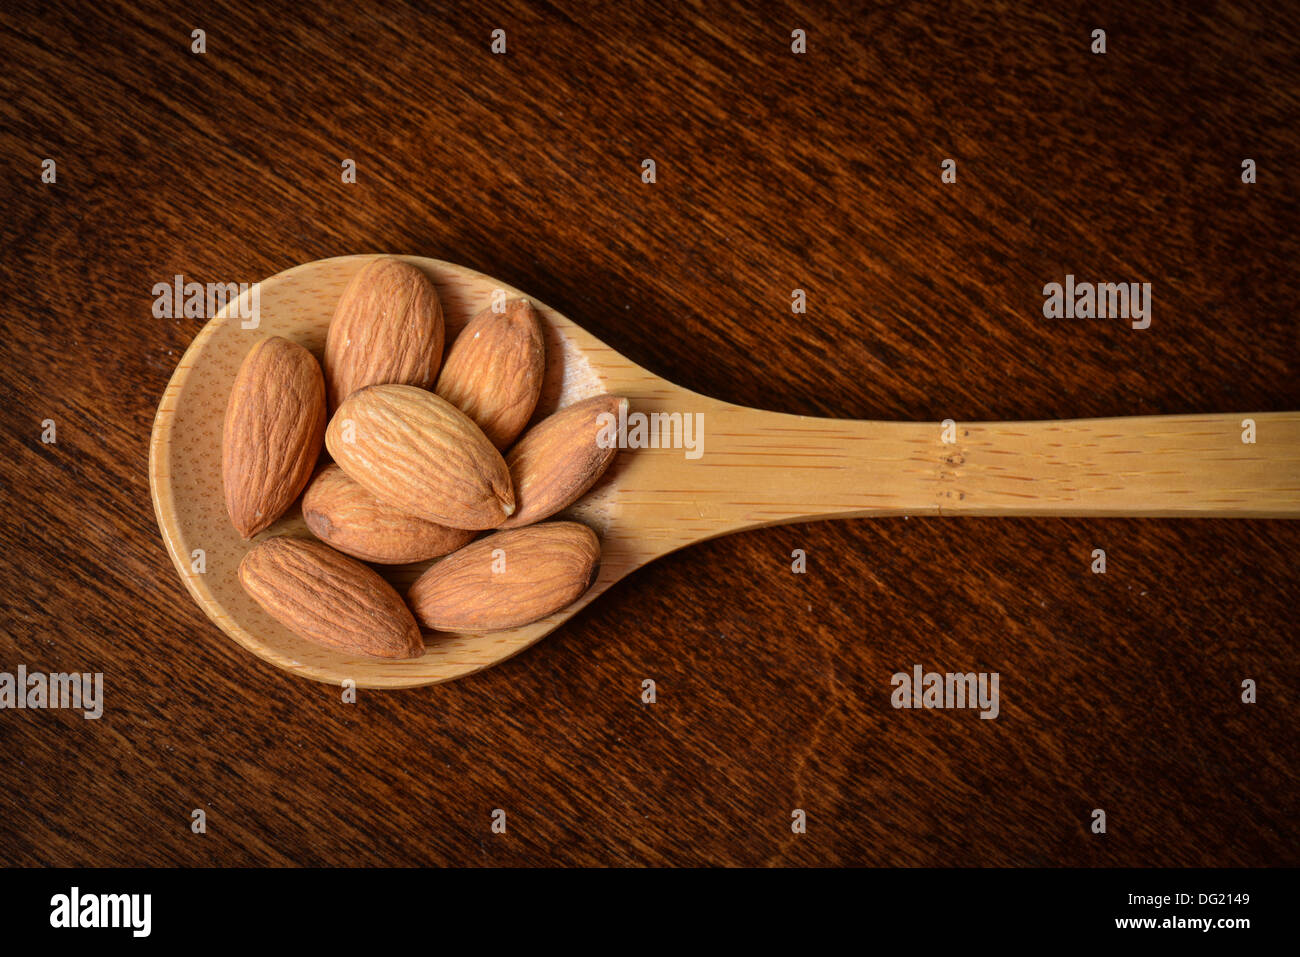 Almonds on a Wooden Spoon with Wood Texture Background Stock Photo